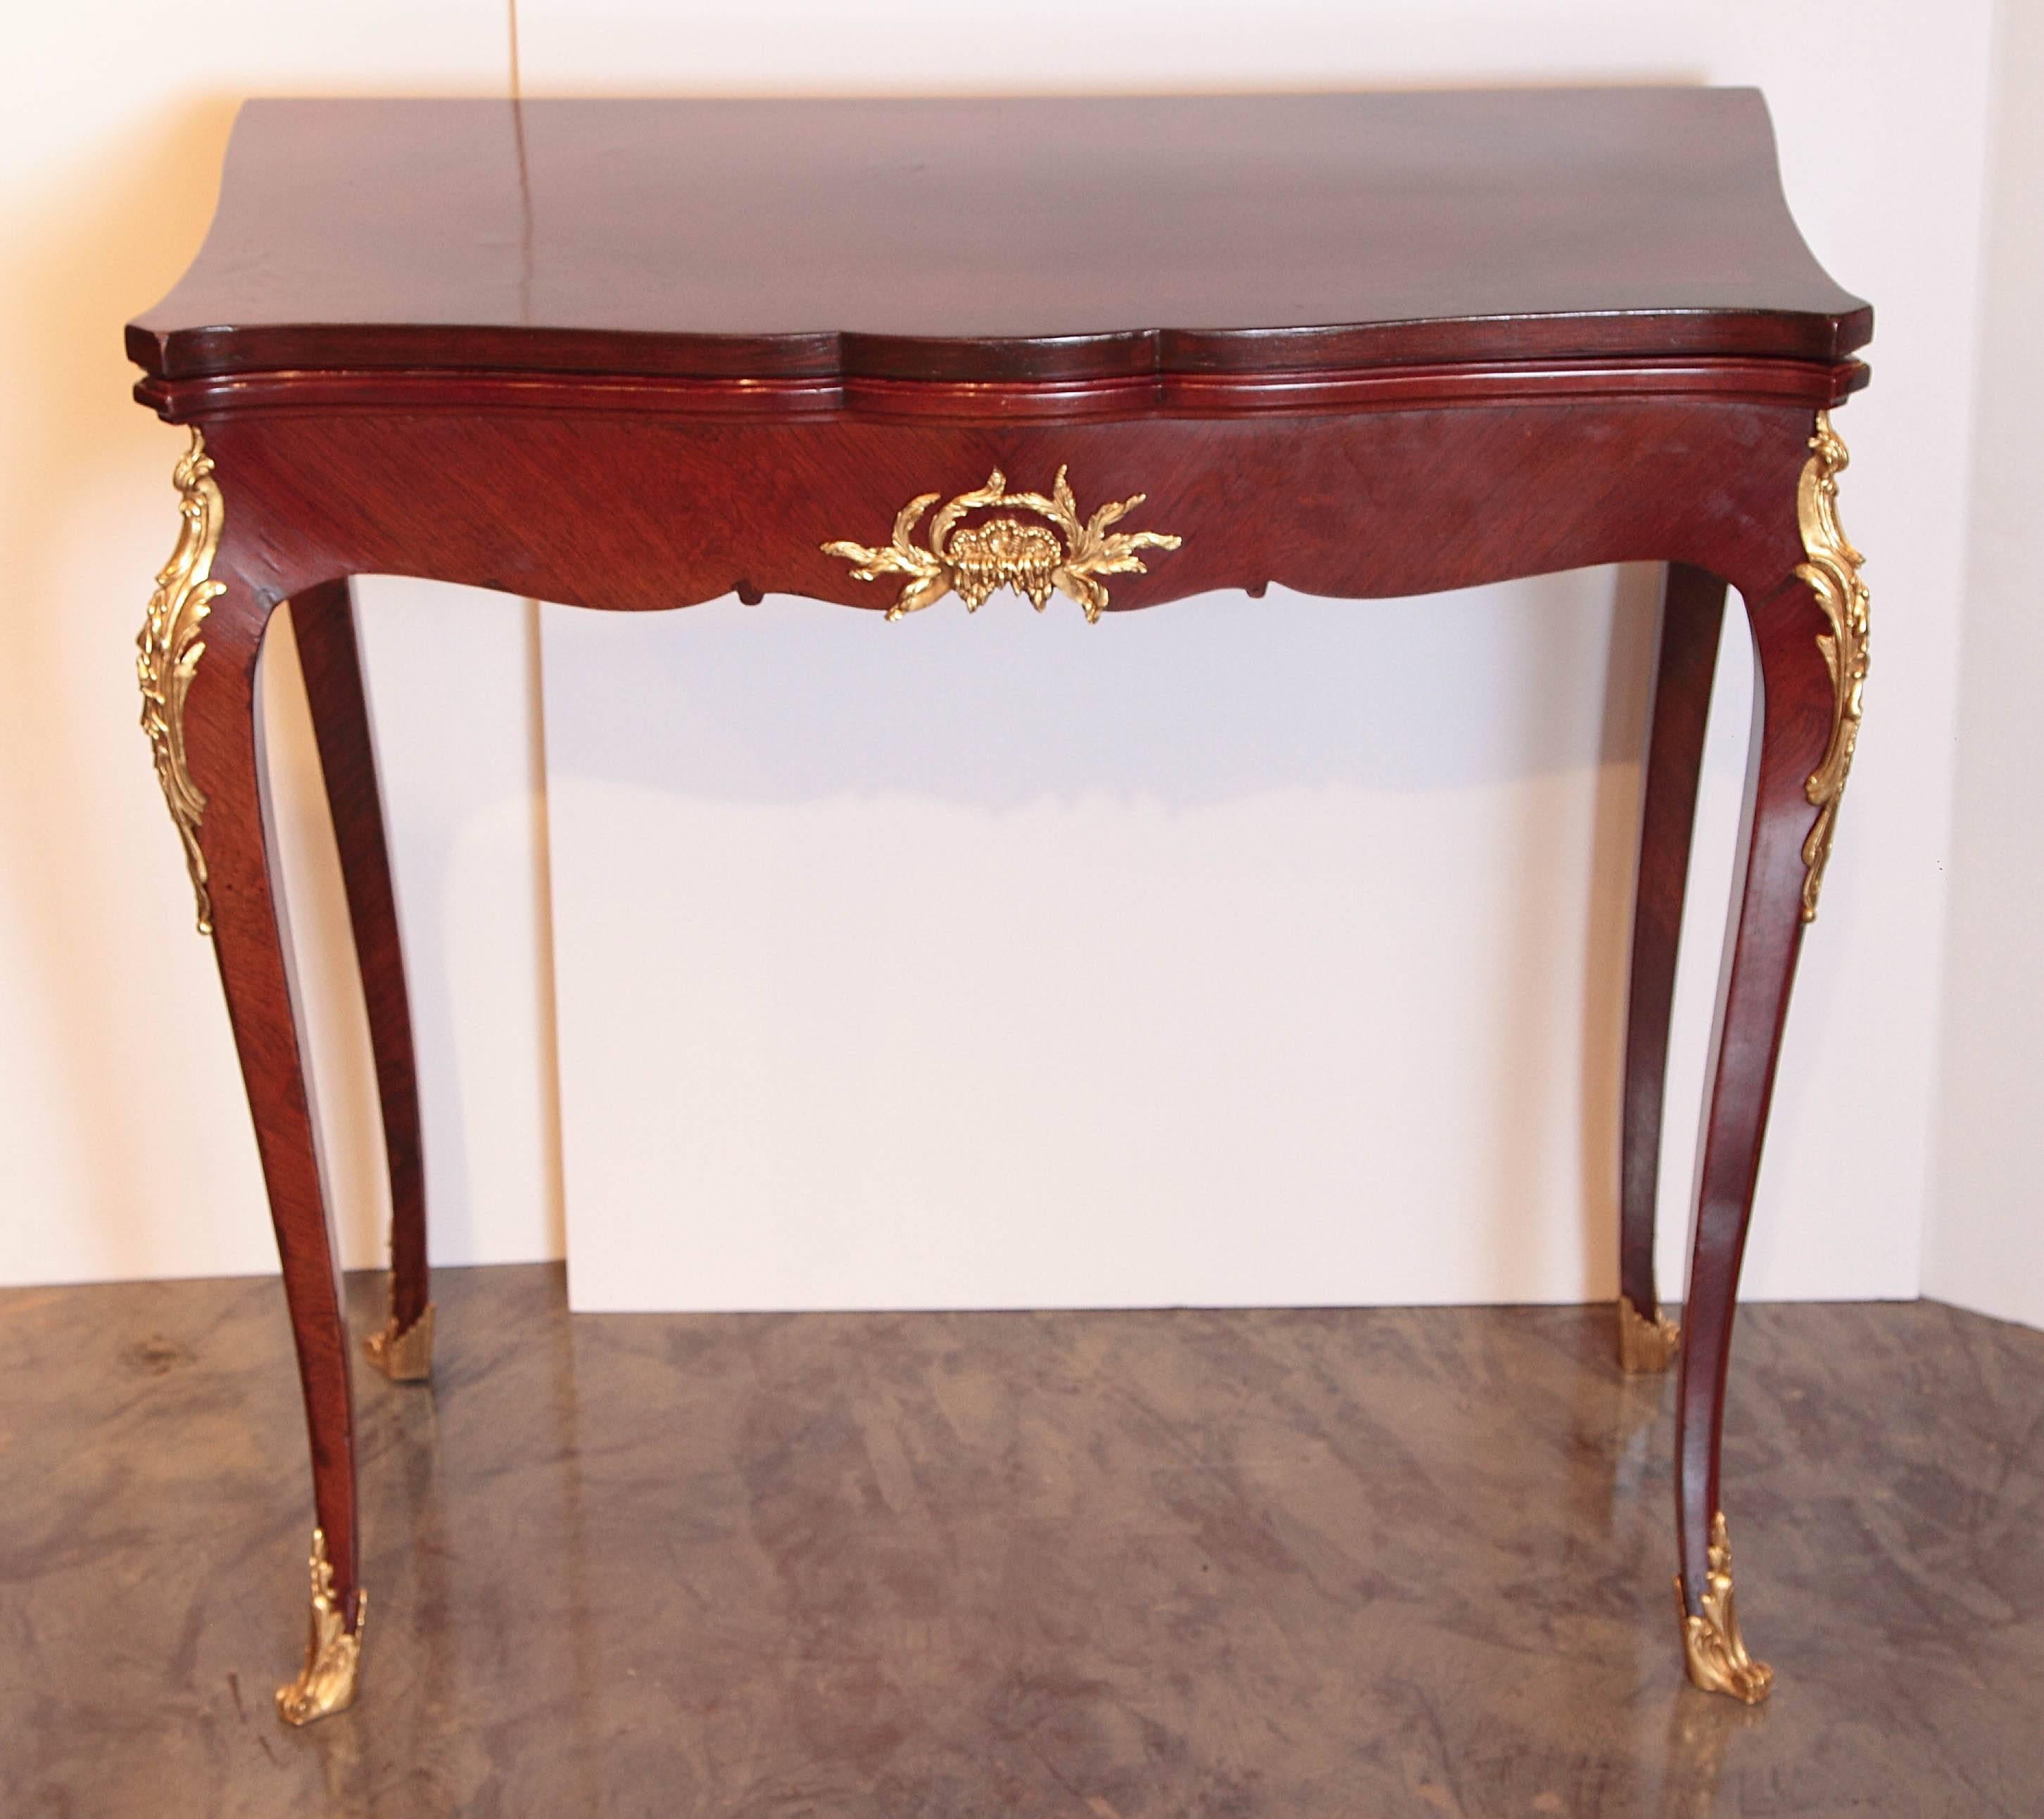 19th century French Louis XV game table signed F Linke
pictured on page 490 inventory number 278 in the book of Linke Furniture by Christopher Payne.